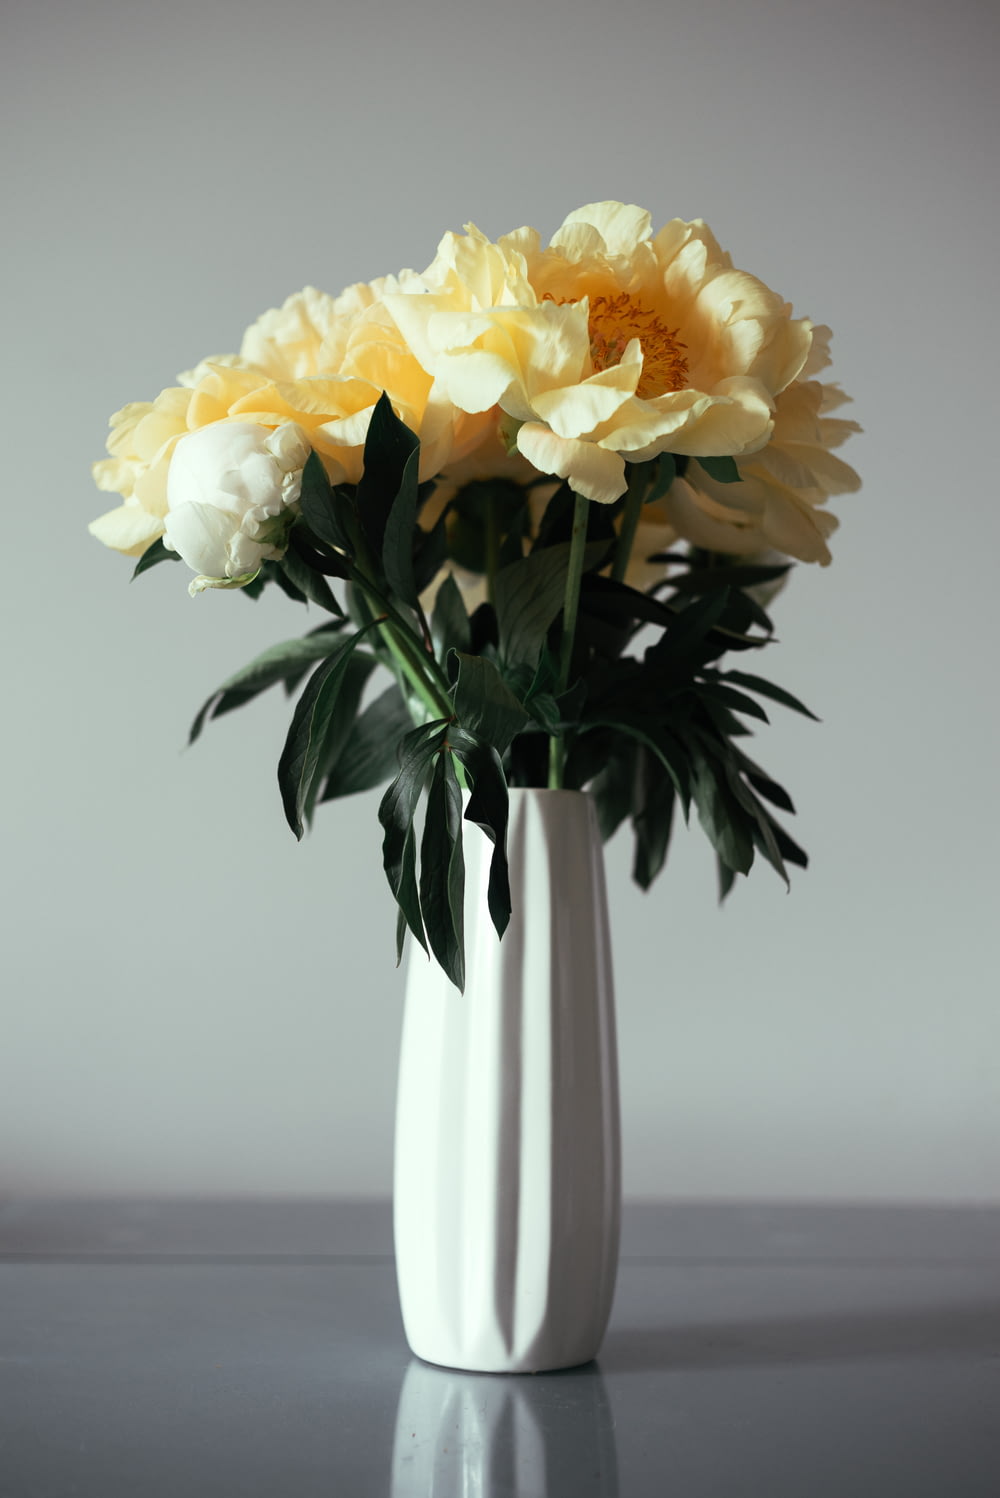 a white vase filled with yellow and white flowers